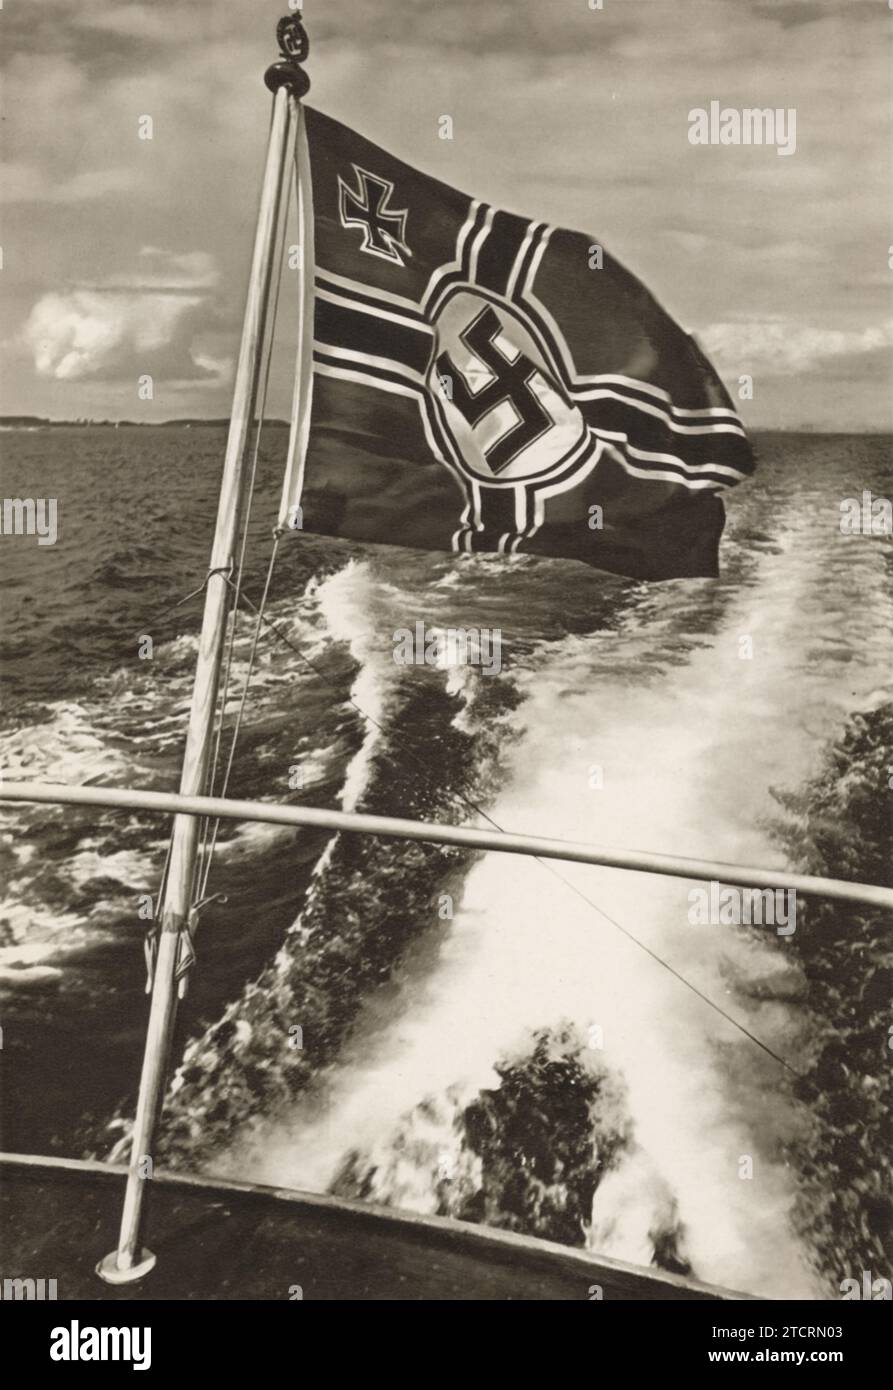 The image shows a German warflag prominently displayed at the rear of a boat sailing in open waters. The presence of the flag, along with the design of the boat, suggests it is part of the German Navy, the Kriegsmarine, active during World War II. The Kriegsmarine played a significant role in Germany's military strategy, with its fleet operating in various naval theaters. The flag, a symbol of the nation's military presence, was typically flown on such vessels to signify their allegiance and operational identity. Stock Photo